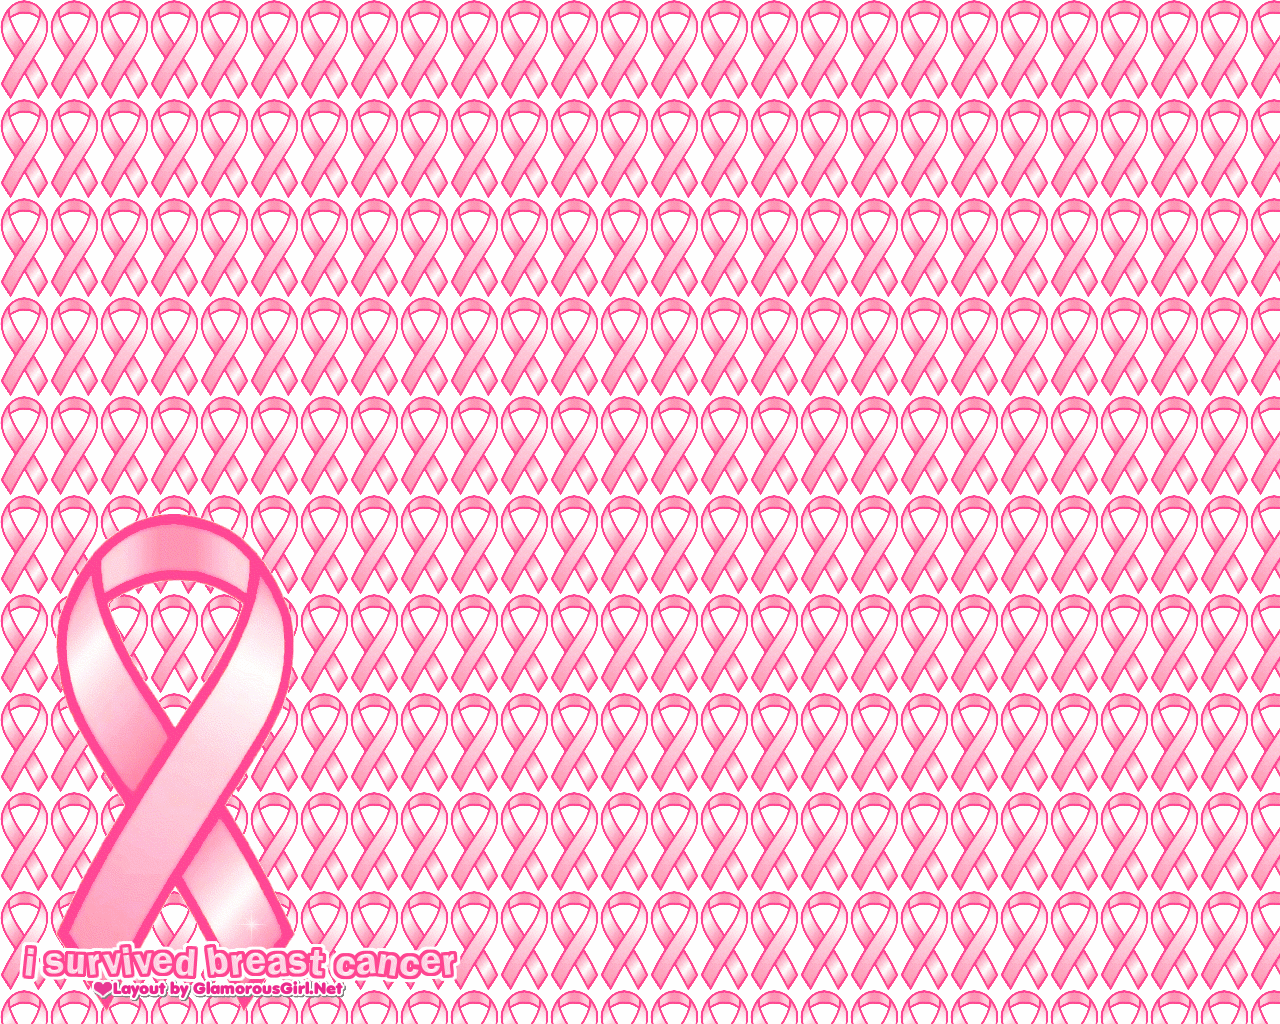 Think Pink Breast Cancer Background Picture